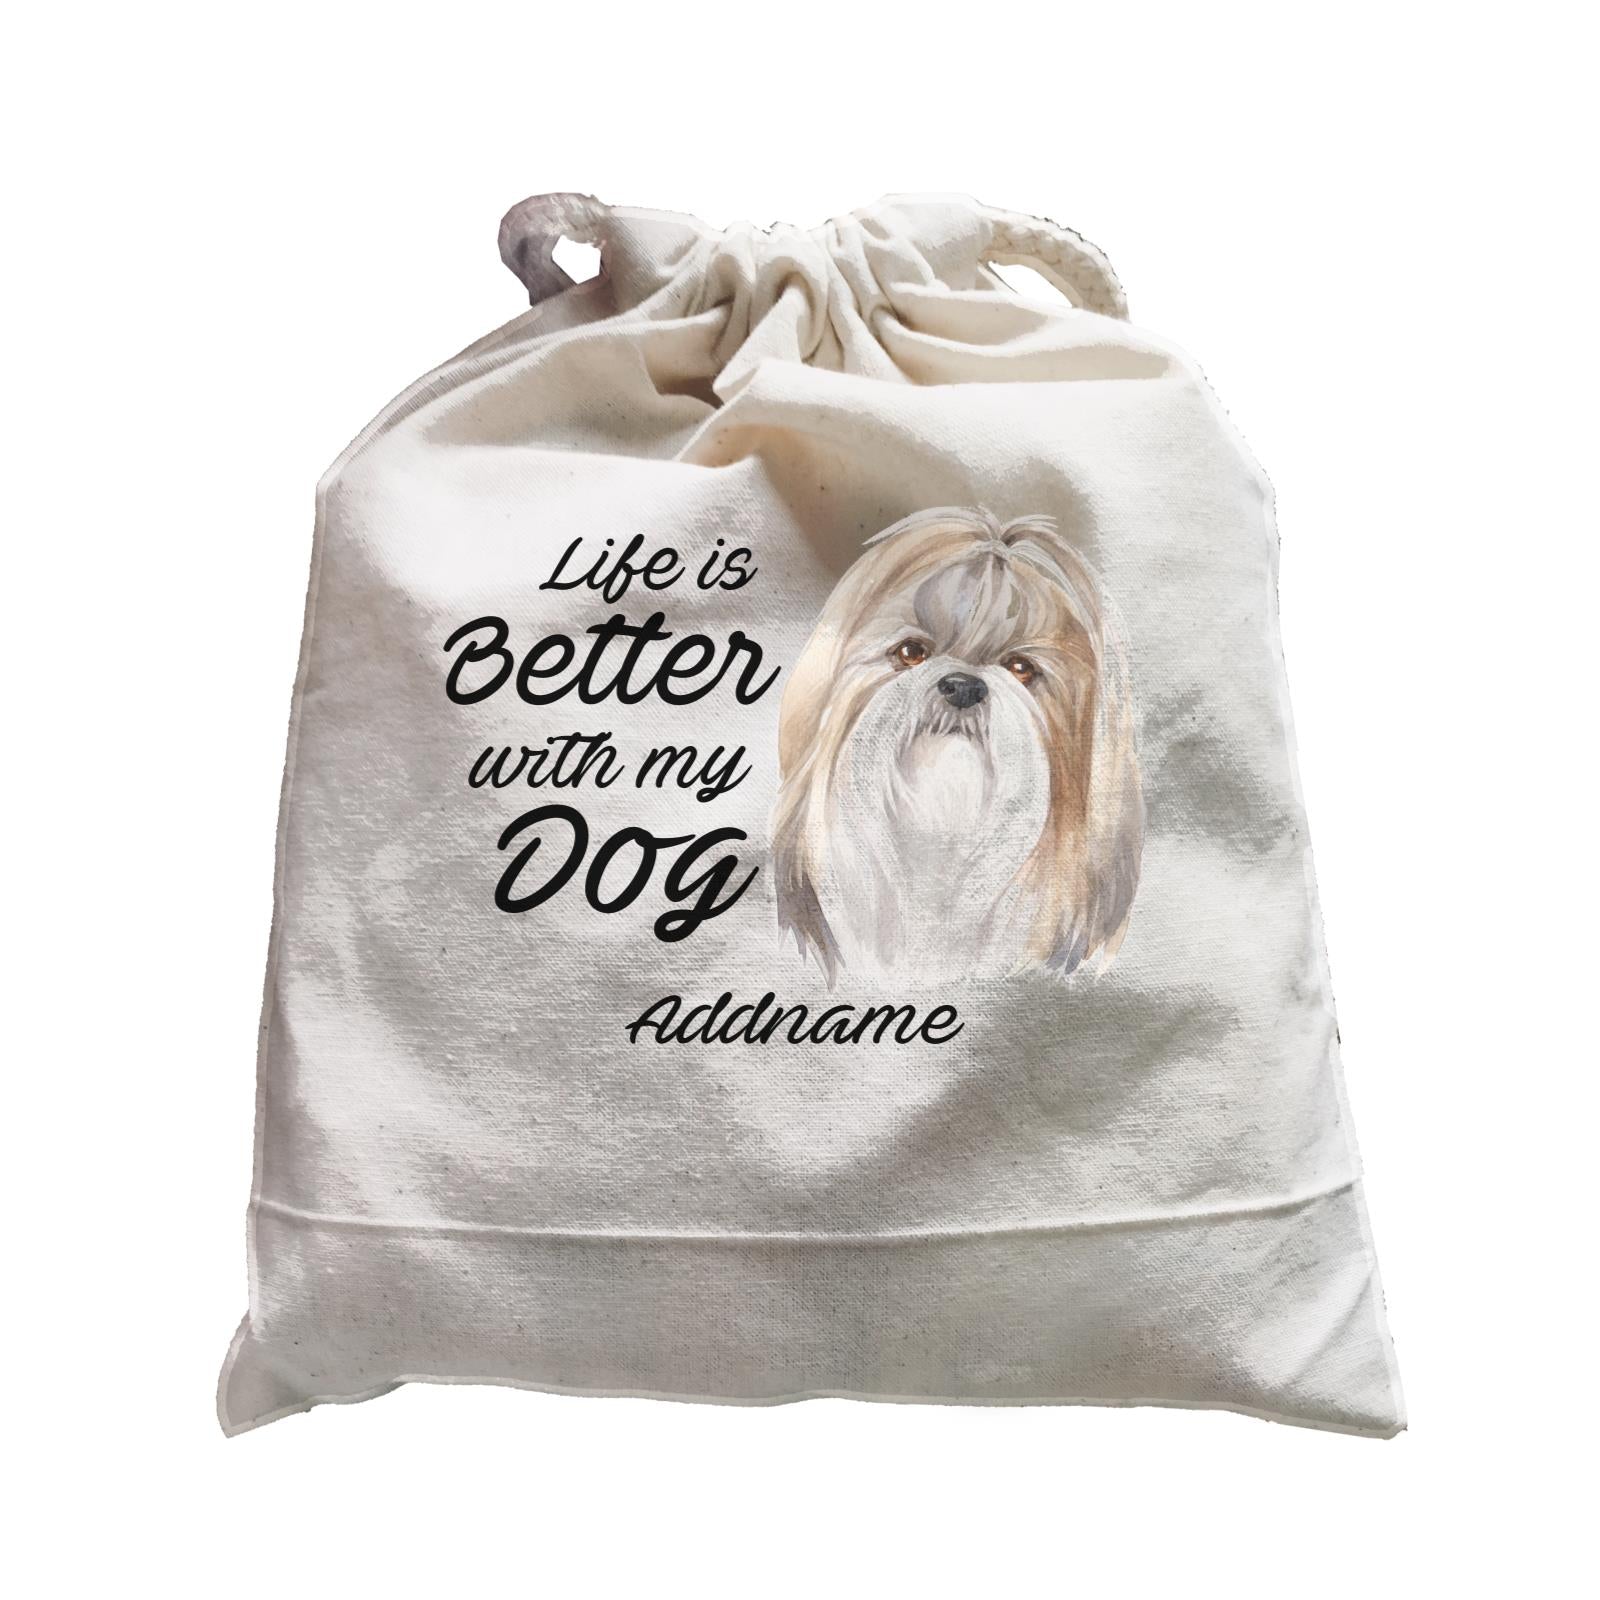 Watercolor Life is Better With My Dog Shih Tzu Addname Satchel